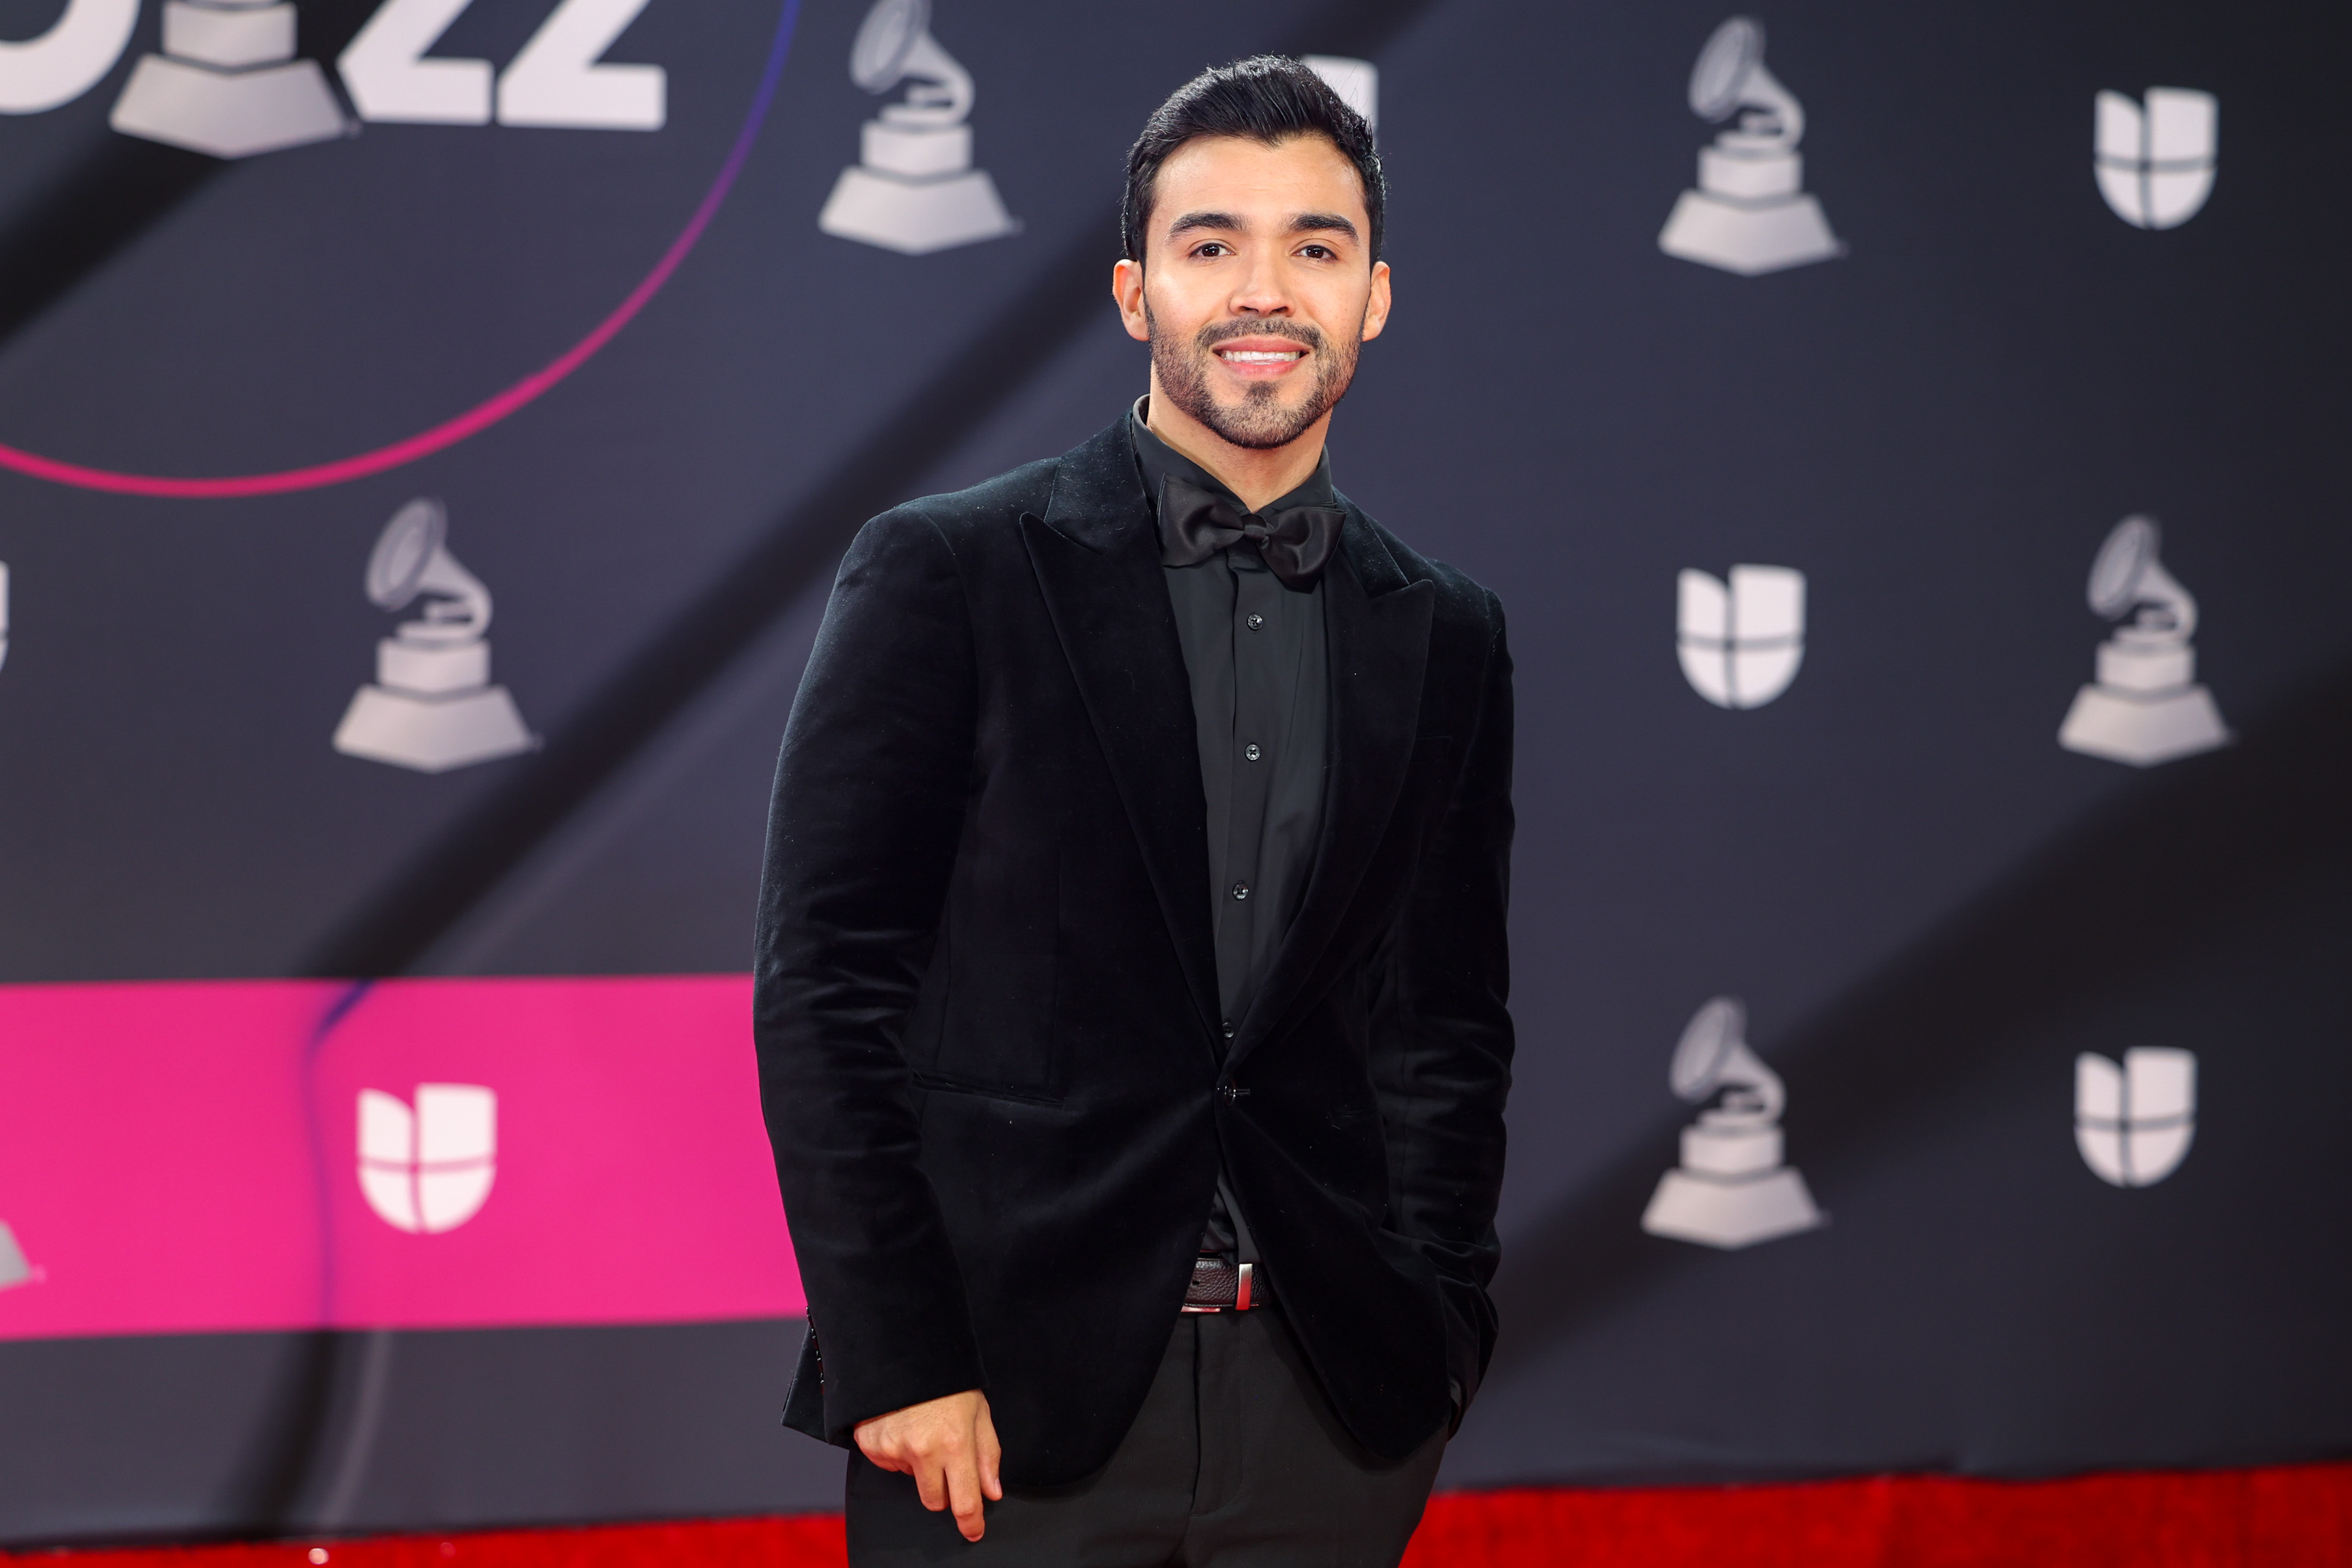 Gussy Lau at the 23rd Annual Latin Grammy Awards held at the Michelob Ultra Arena on November 17, 2022, in Las Vegas, Nevada. | Source: Getty Images